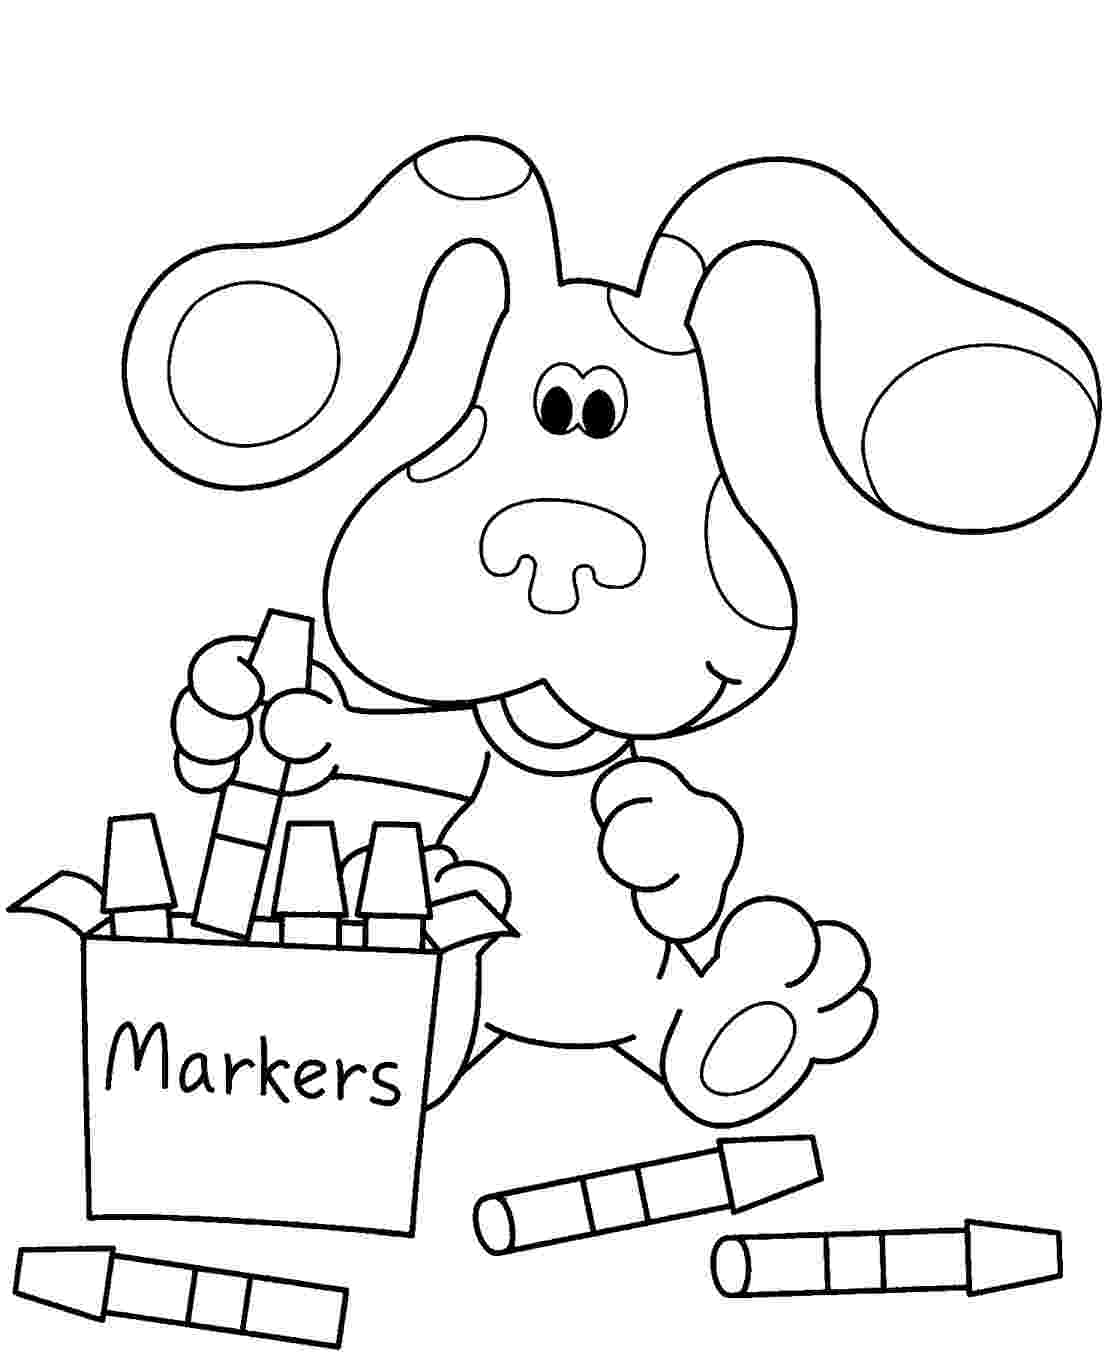 blues clues coloring pages free printable blues clues coloring pages for kids blues pages clues coloring 